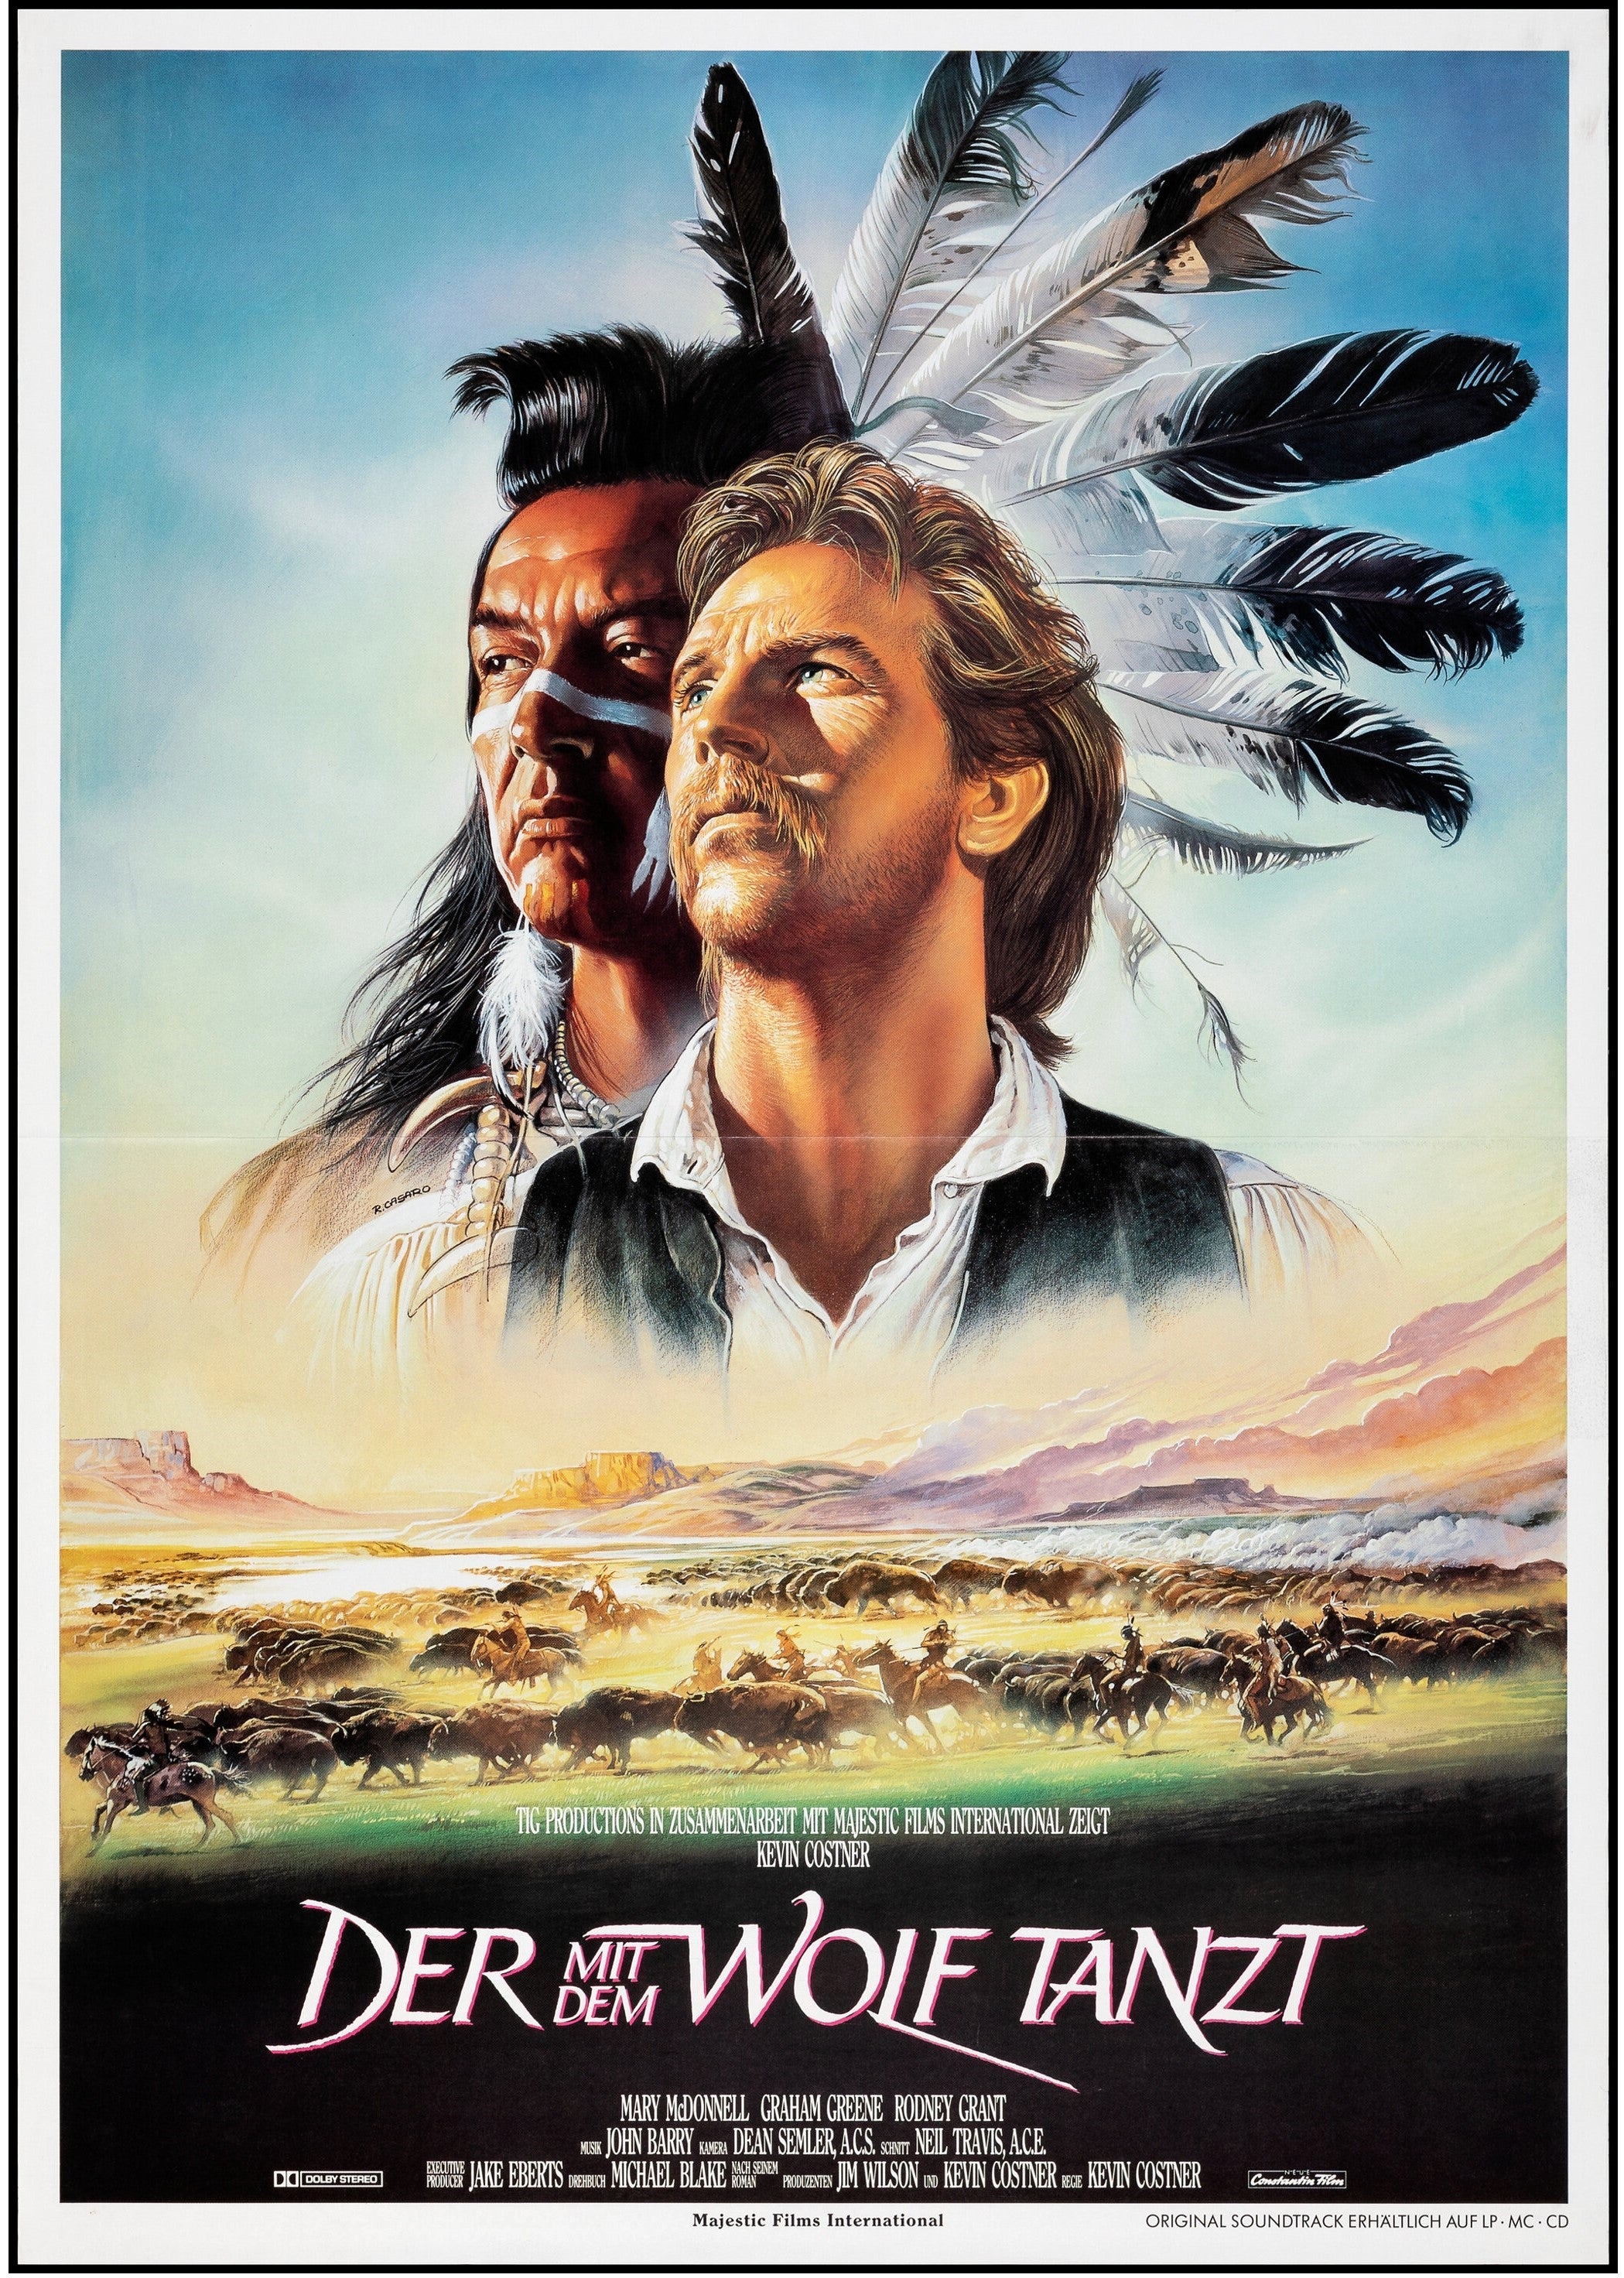 DANCES WITH WOLVES (1990)